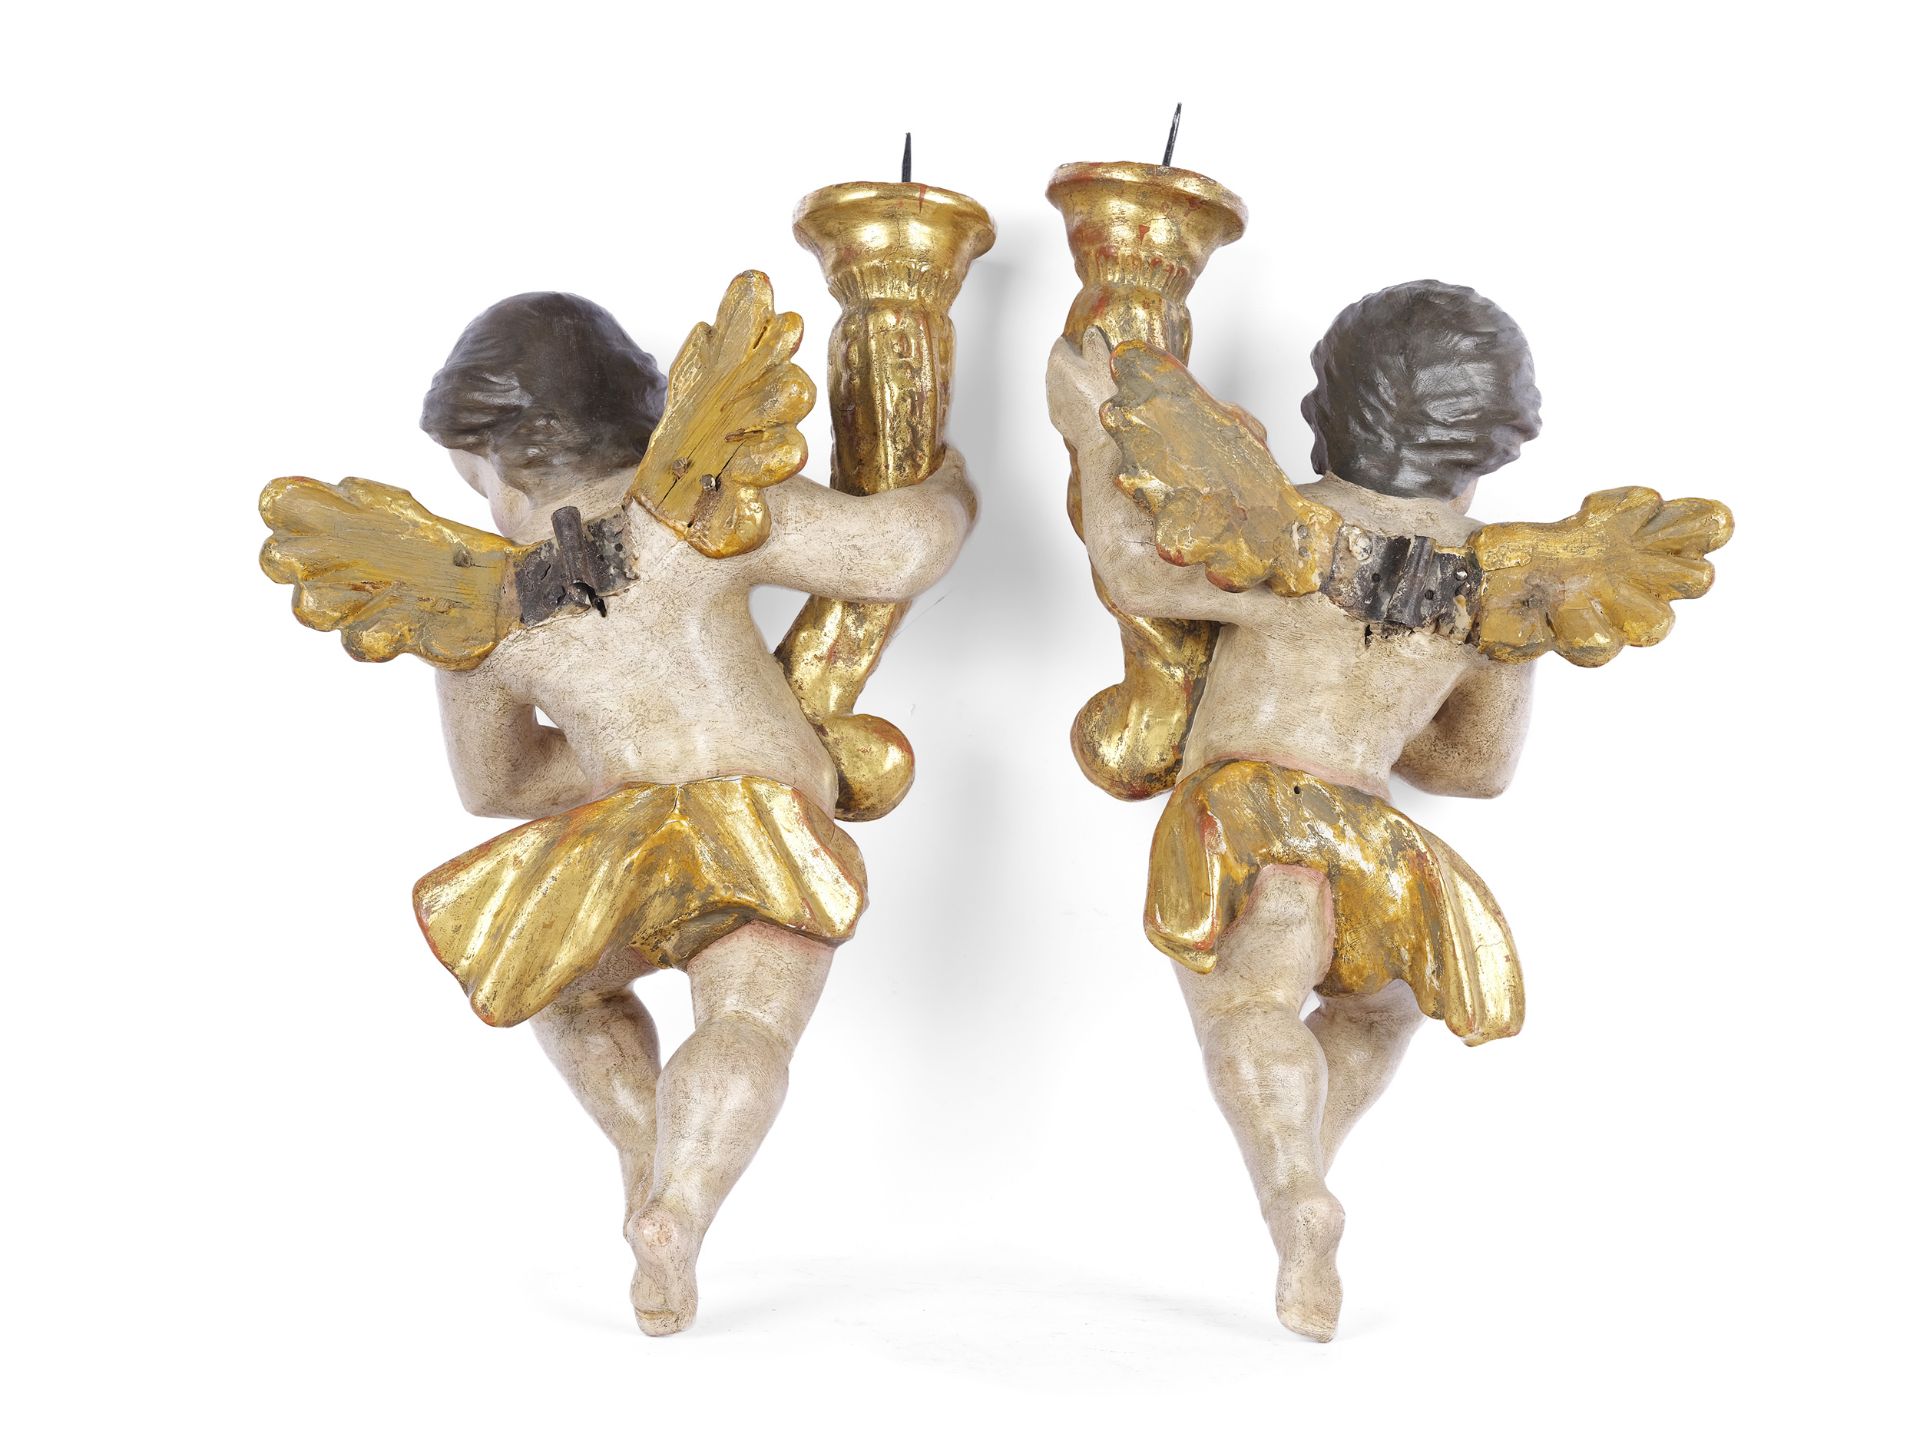 Pair of baroque angels, South German, mid 18th century - Image 2 of 2